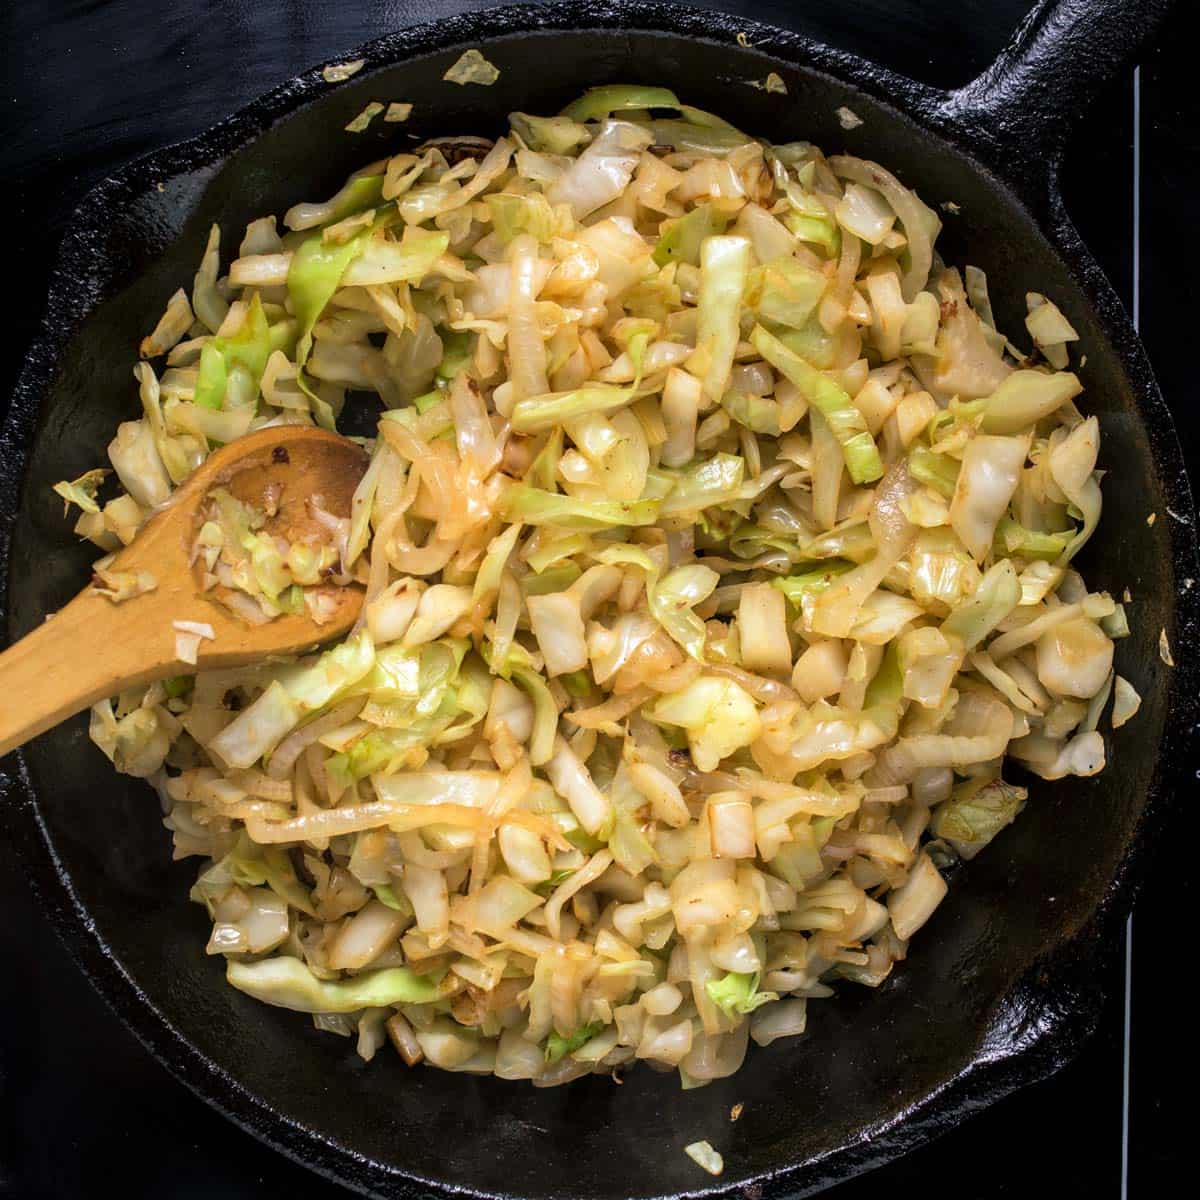 Frying the cabbage for haluski in a cast-iron skillet.